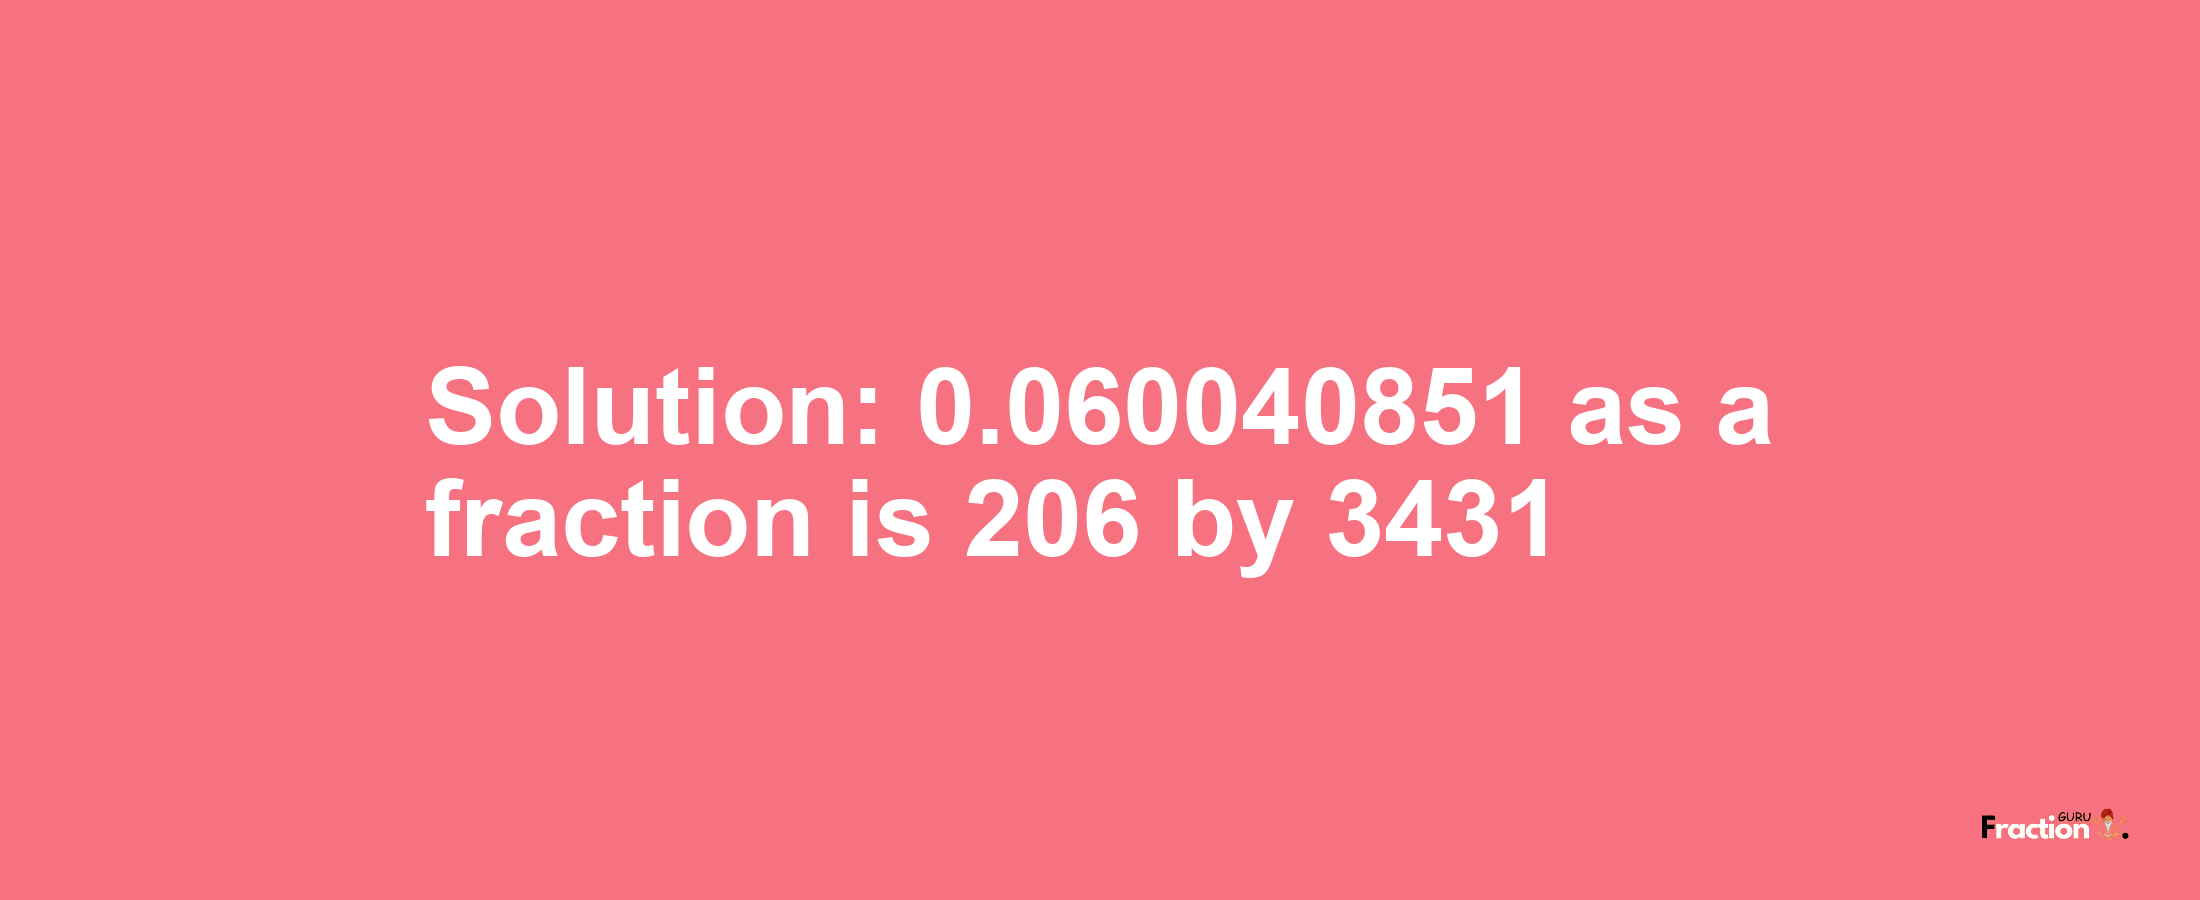 Solution:0.060040851 as a fraction is 206/3431